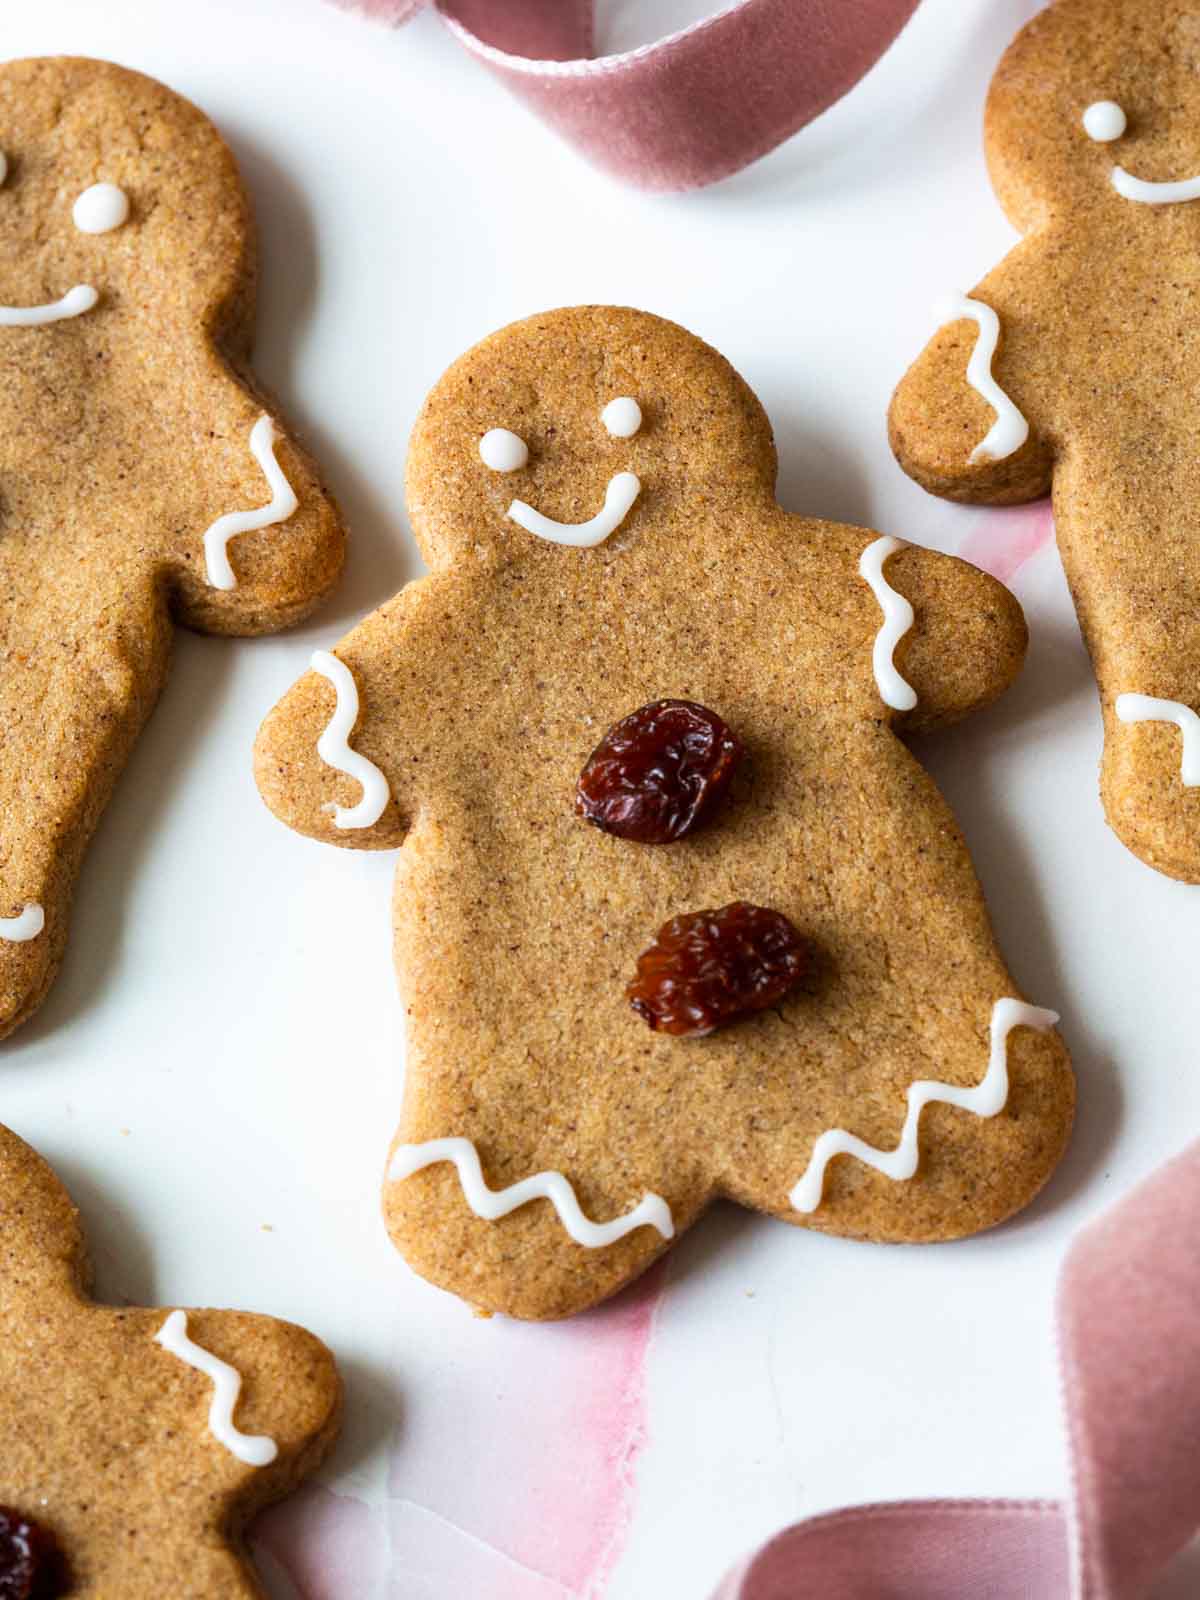 gingerbread cookie with white icing and raisins.